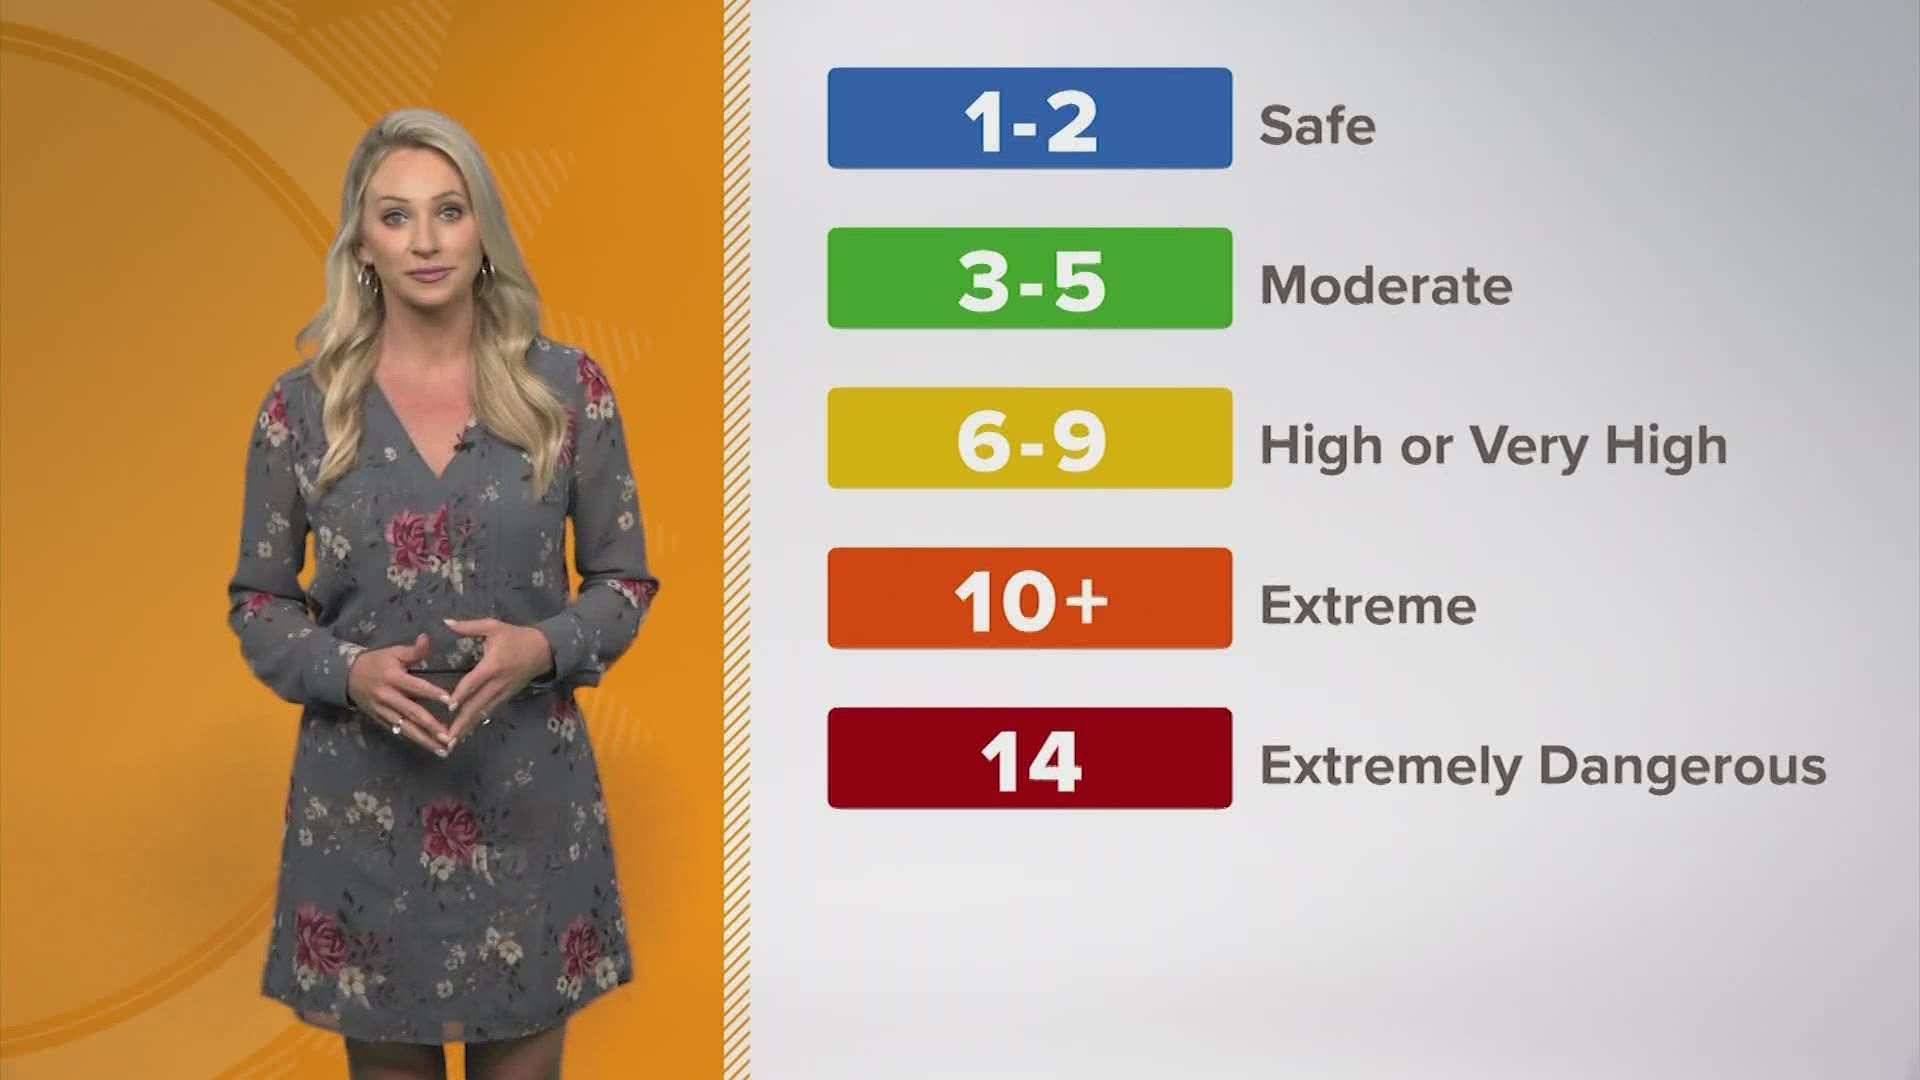 Fun in the sun: The UV Index scale and SPF explained